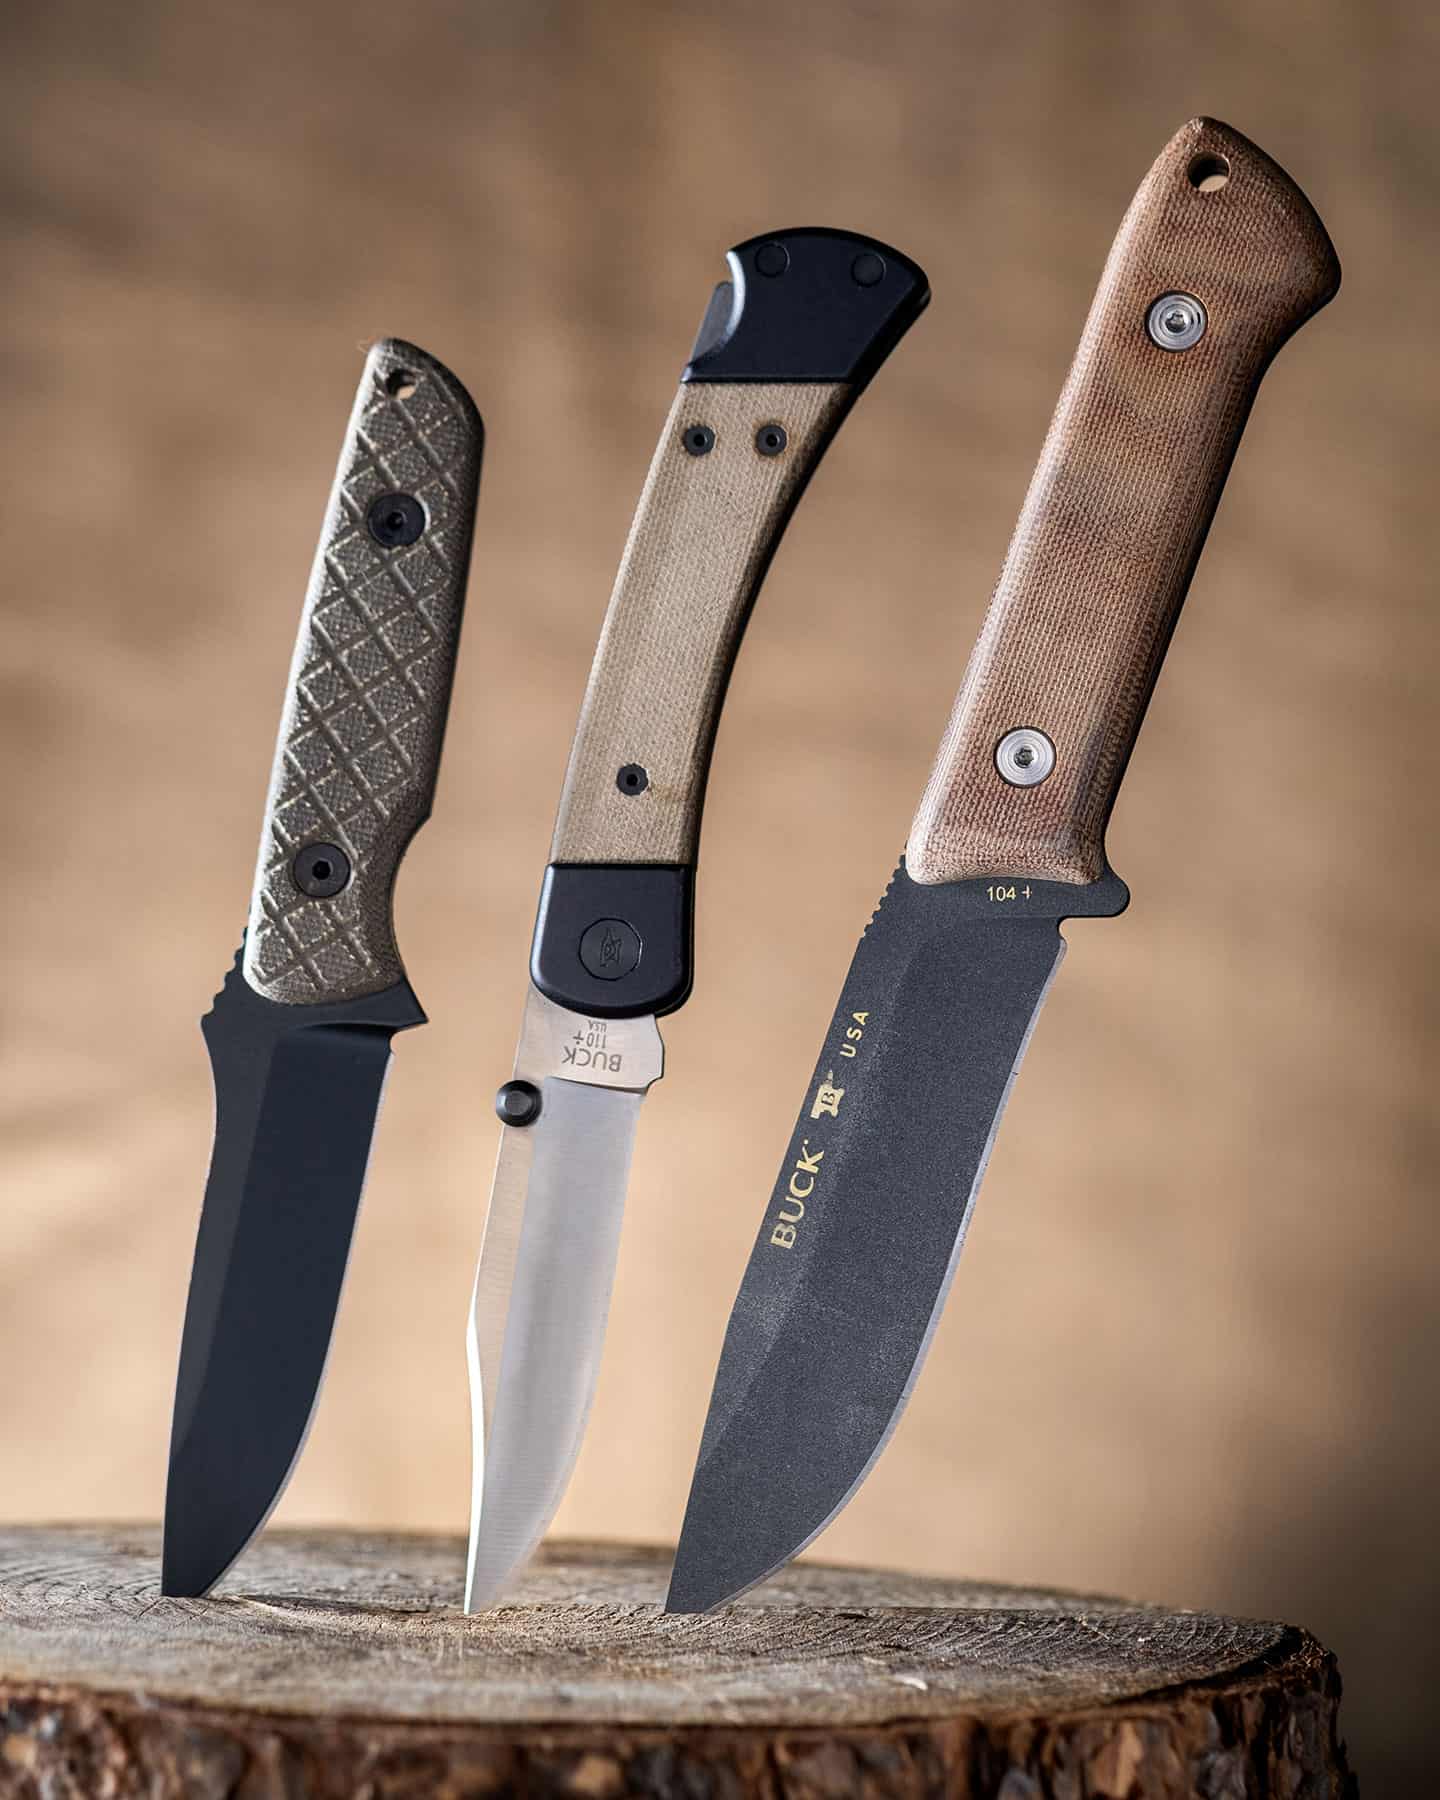 Header image for our artical on the best with micarta handles